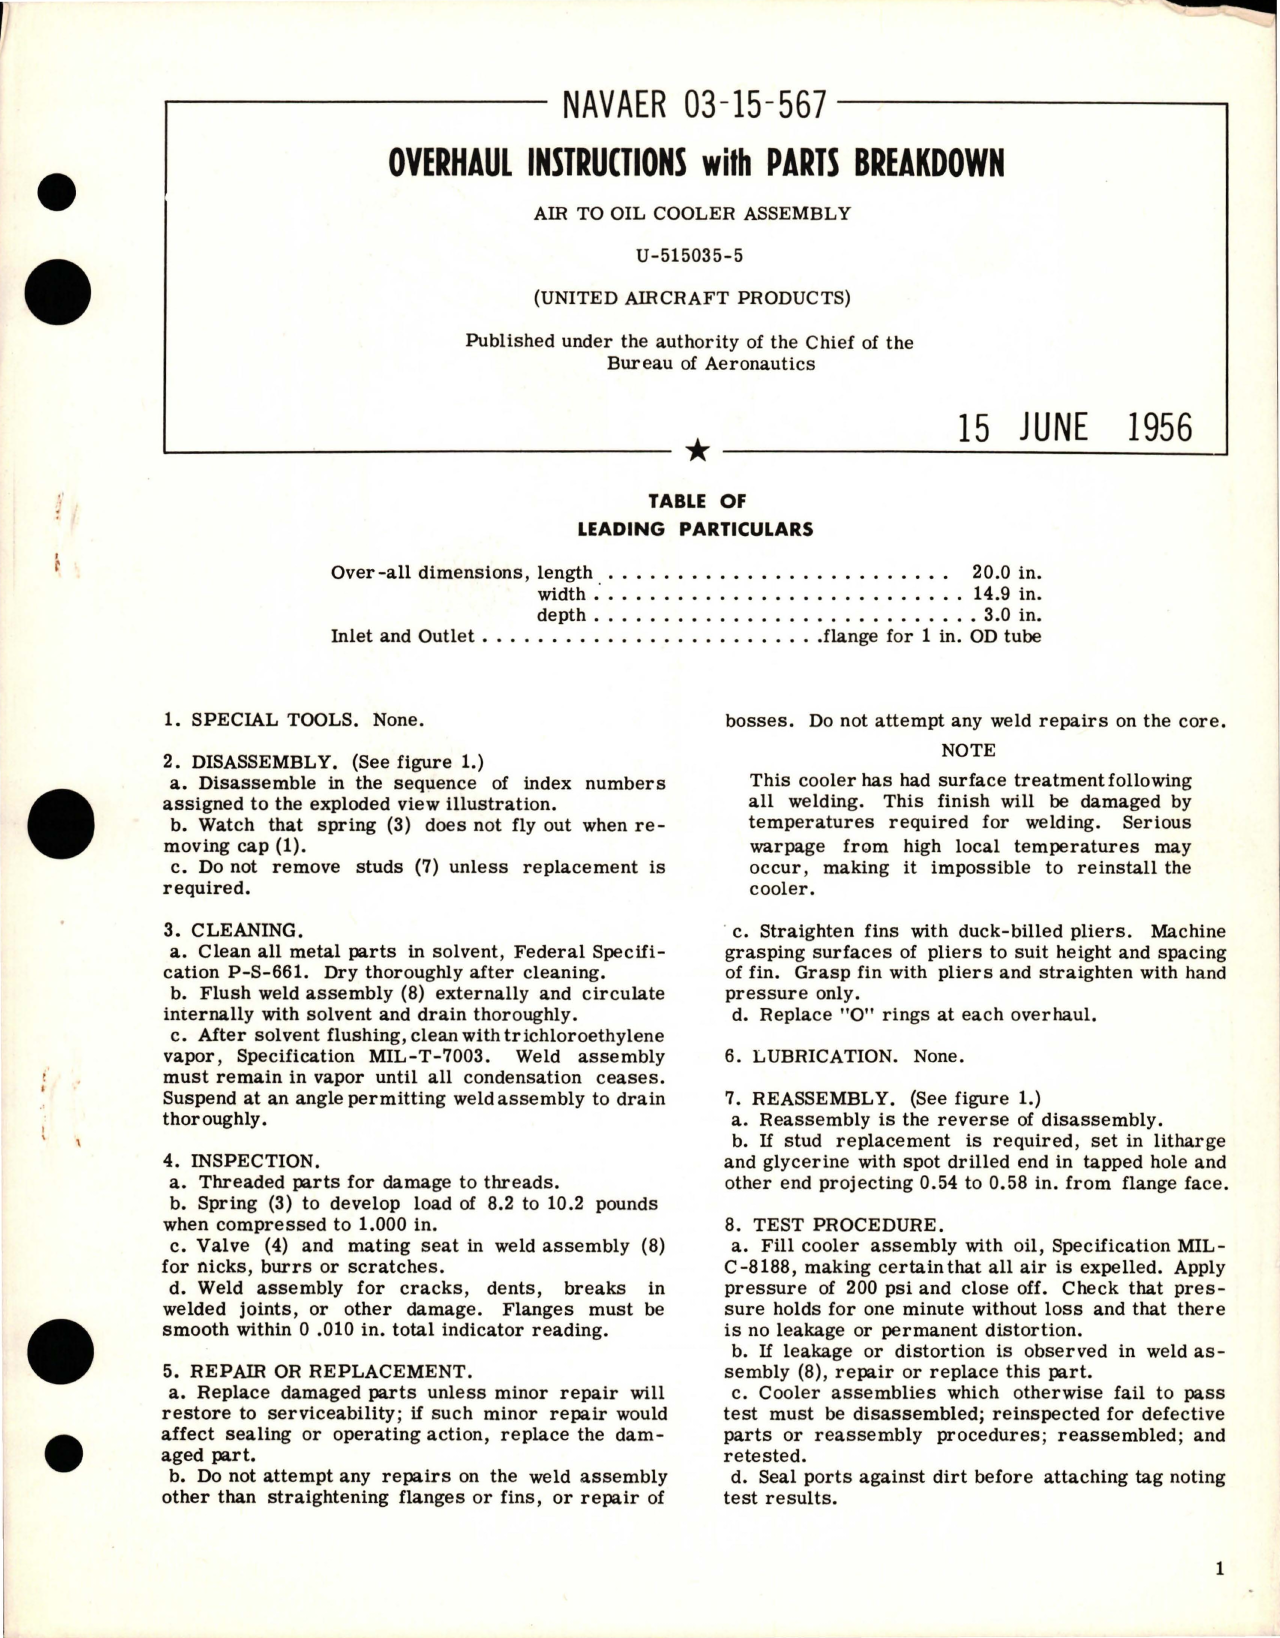 Sample page 1 from AirCorps Library document: Overhaul Instructions with Parts for Air to Oil Cooler Assembly - U-515035-5 